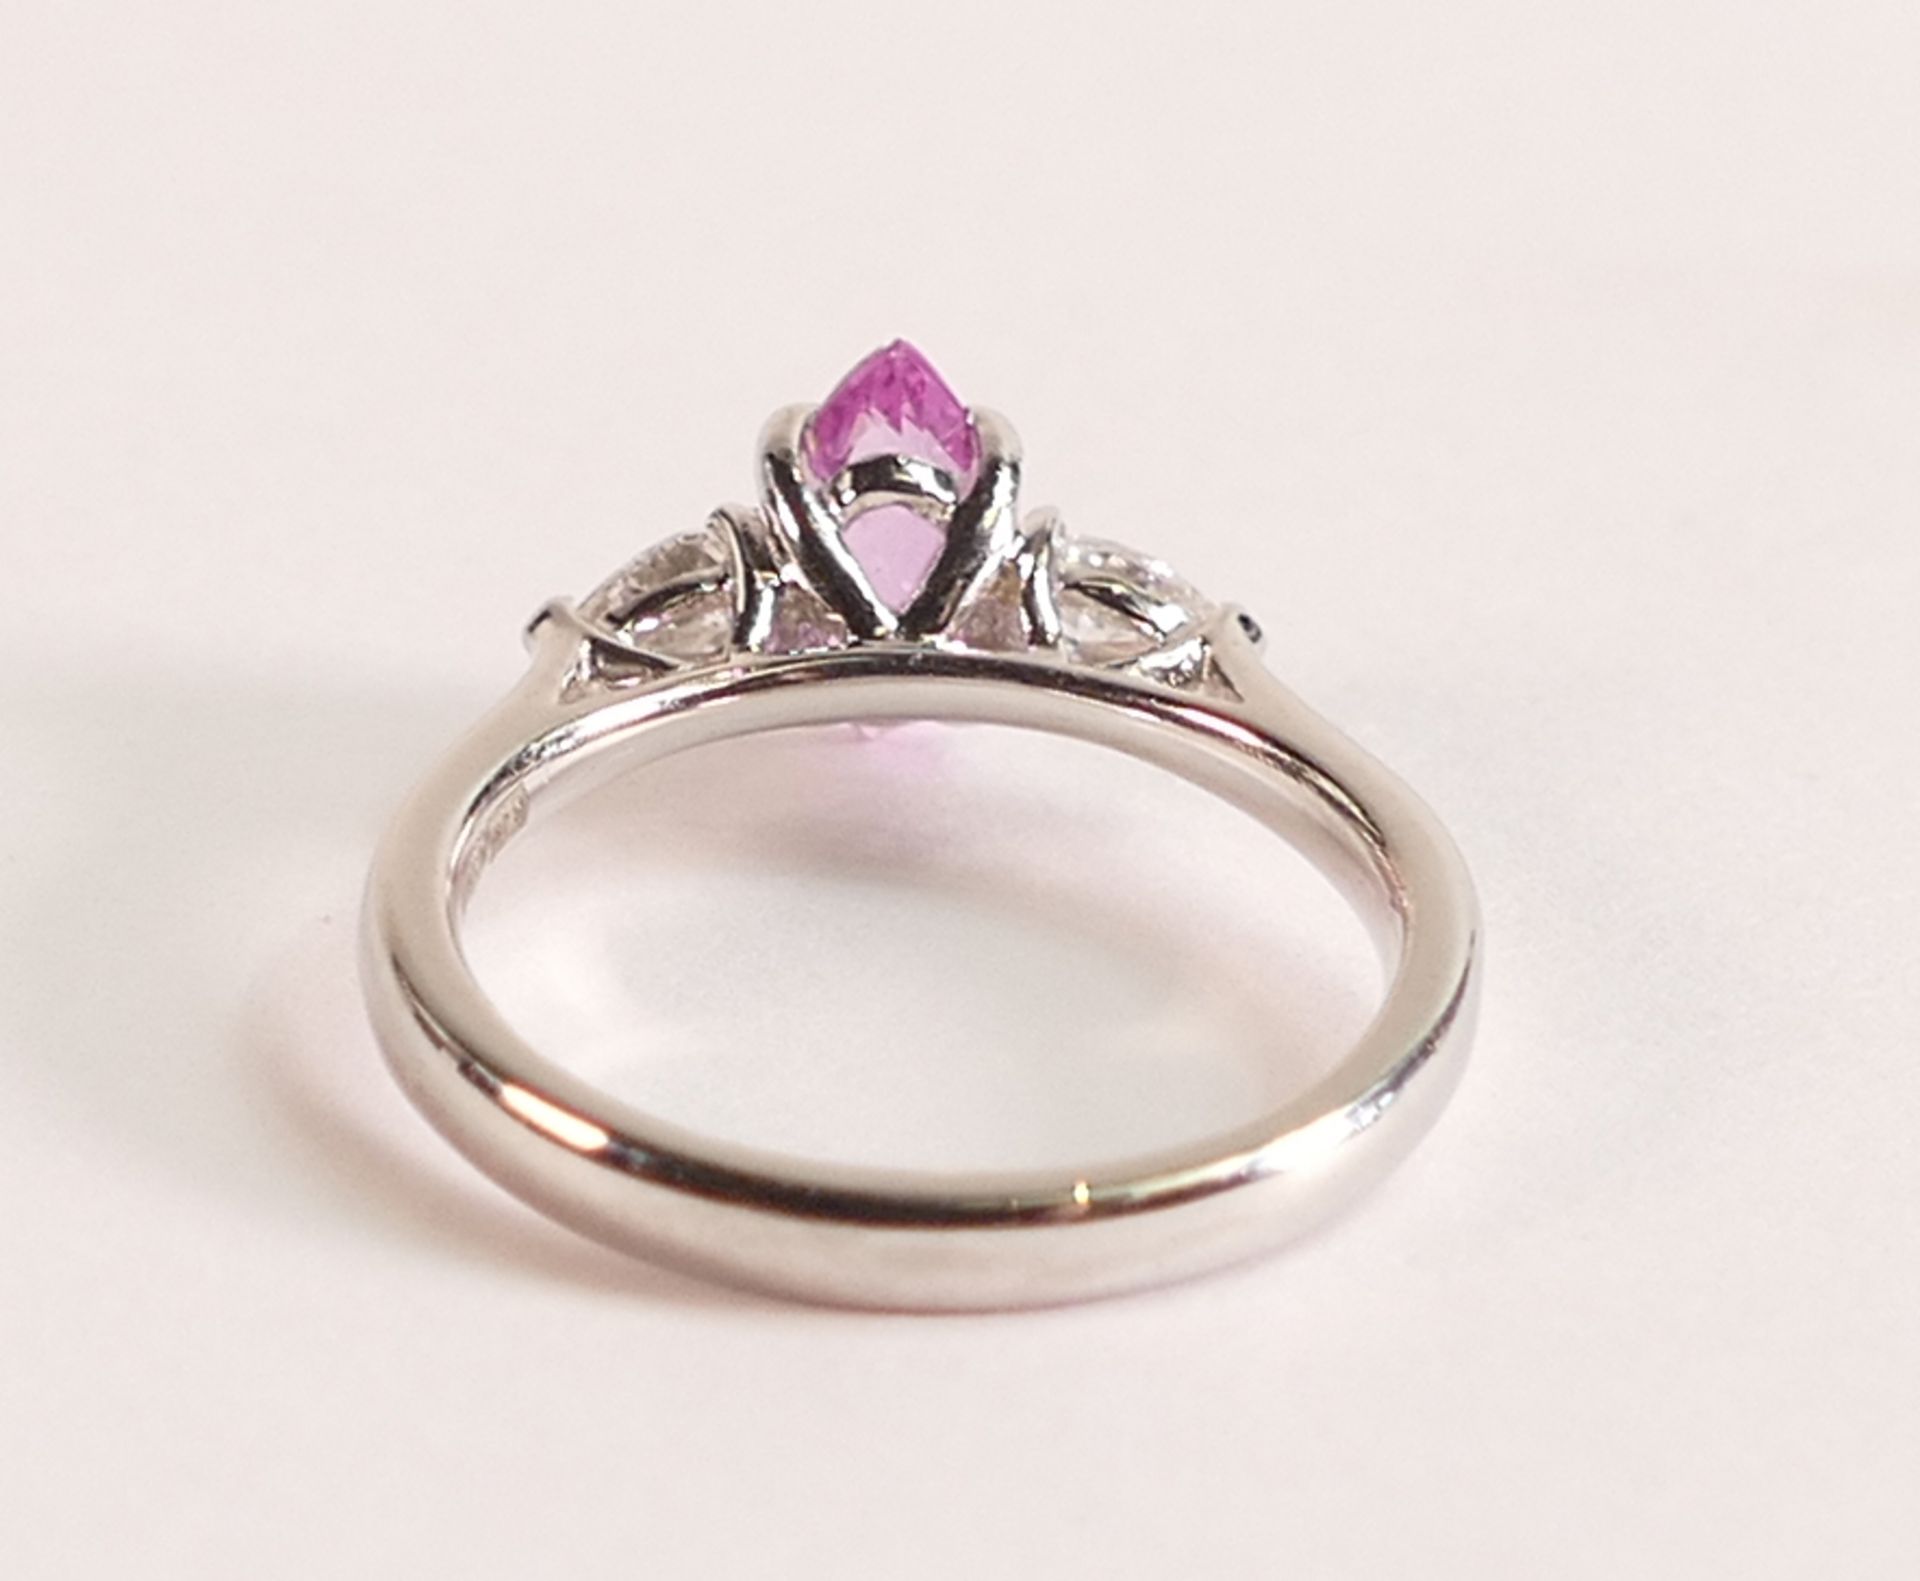 GIA certified Pink Sapphire 1.47ct and Diamond Ring in 950 Platinum - The beautiful marquee cut - Image 3 of 3